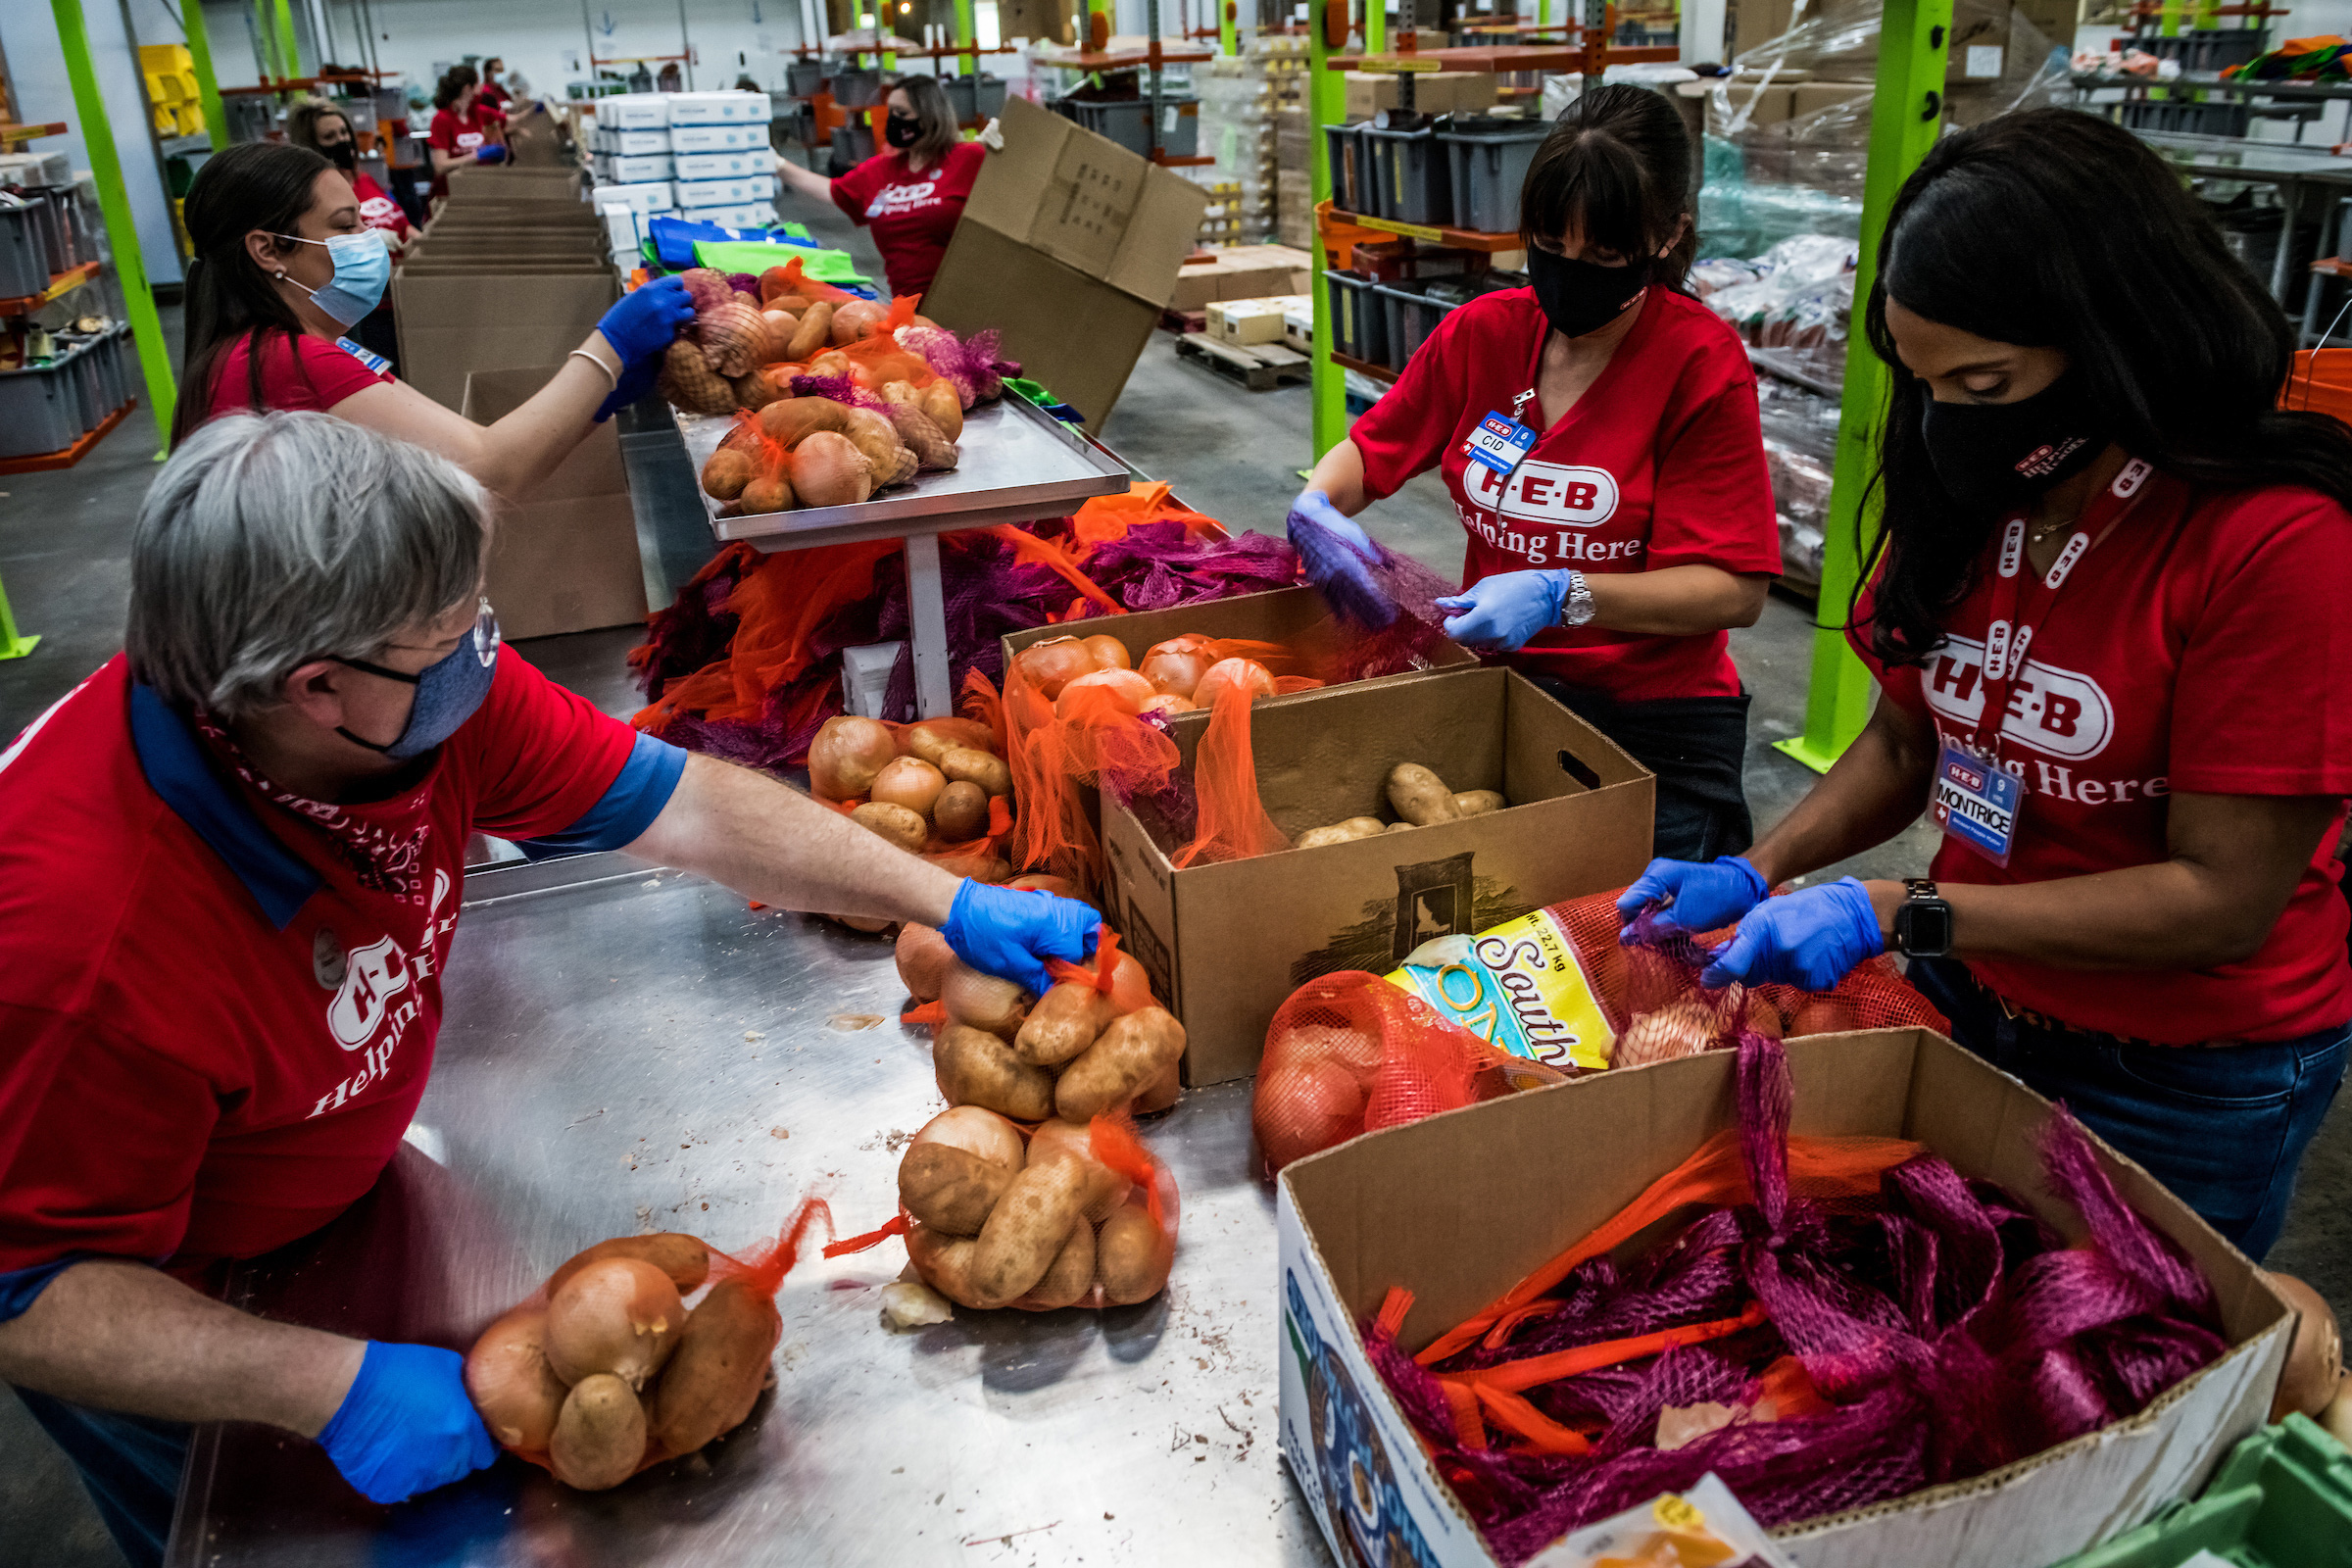 The Houston Food Bank and Texas-based grocery chain H-E-B combine their resources to orchestrate a massive food-distribution event. H-E-B employees, pictured Nov. 17, are packaging boxes full of Thanksgiving necessities in preparation for high demand. (Meridith Kohut for TIME)